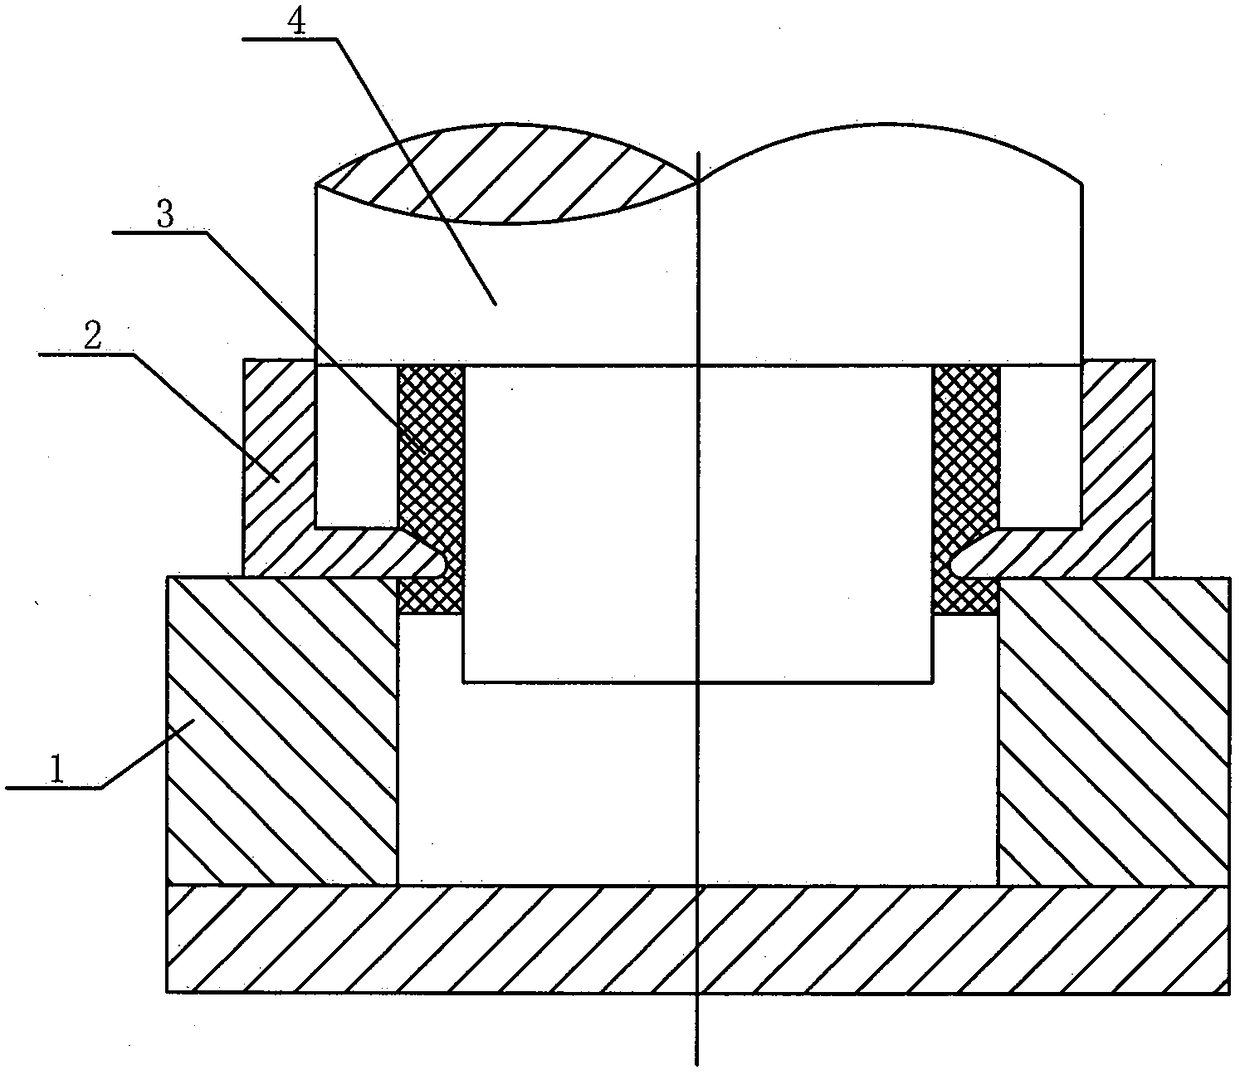 Axial-radial flow dividing extrusion forming method for thin-walled wide-flange vertical bar tubular member